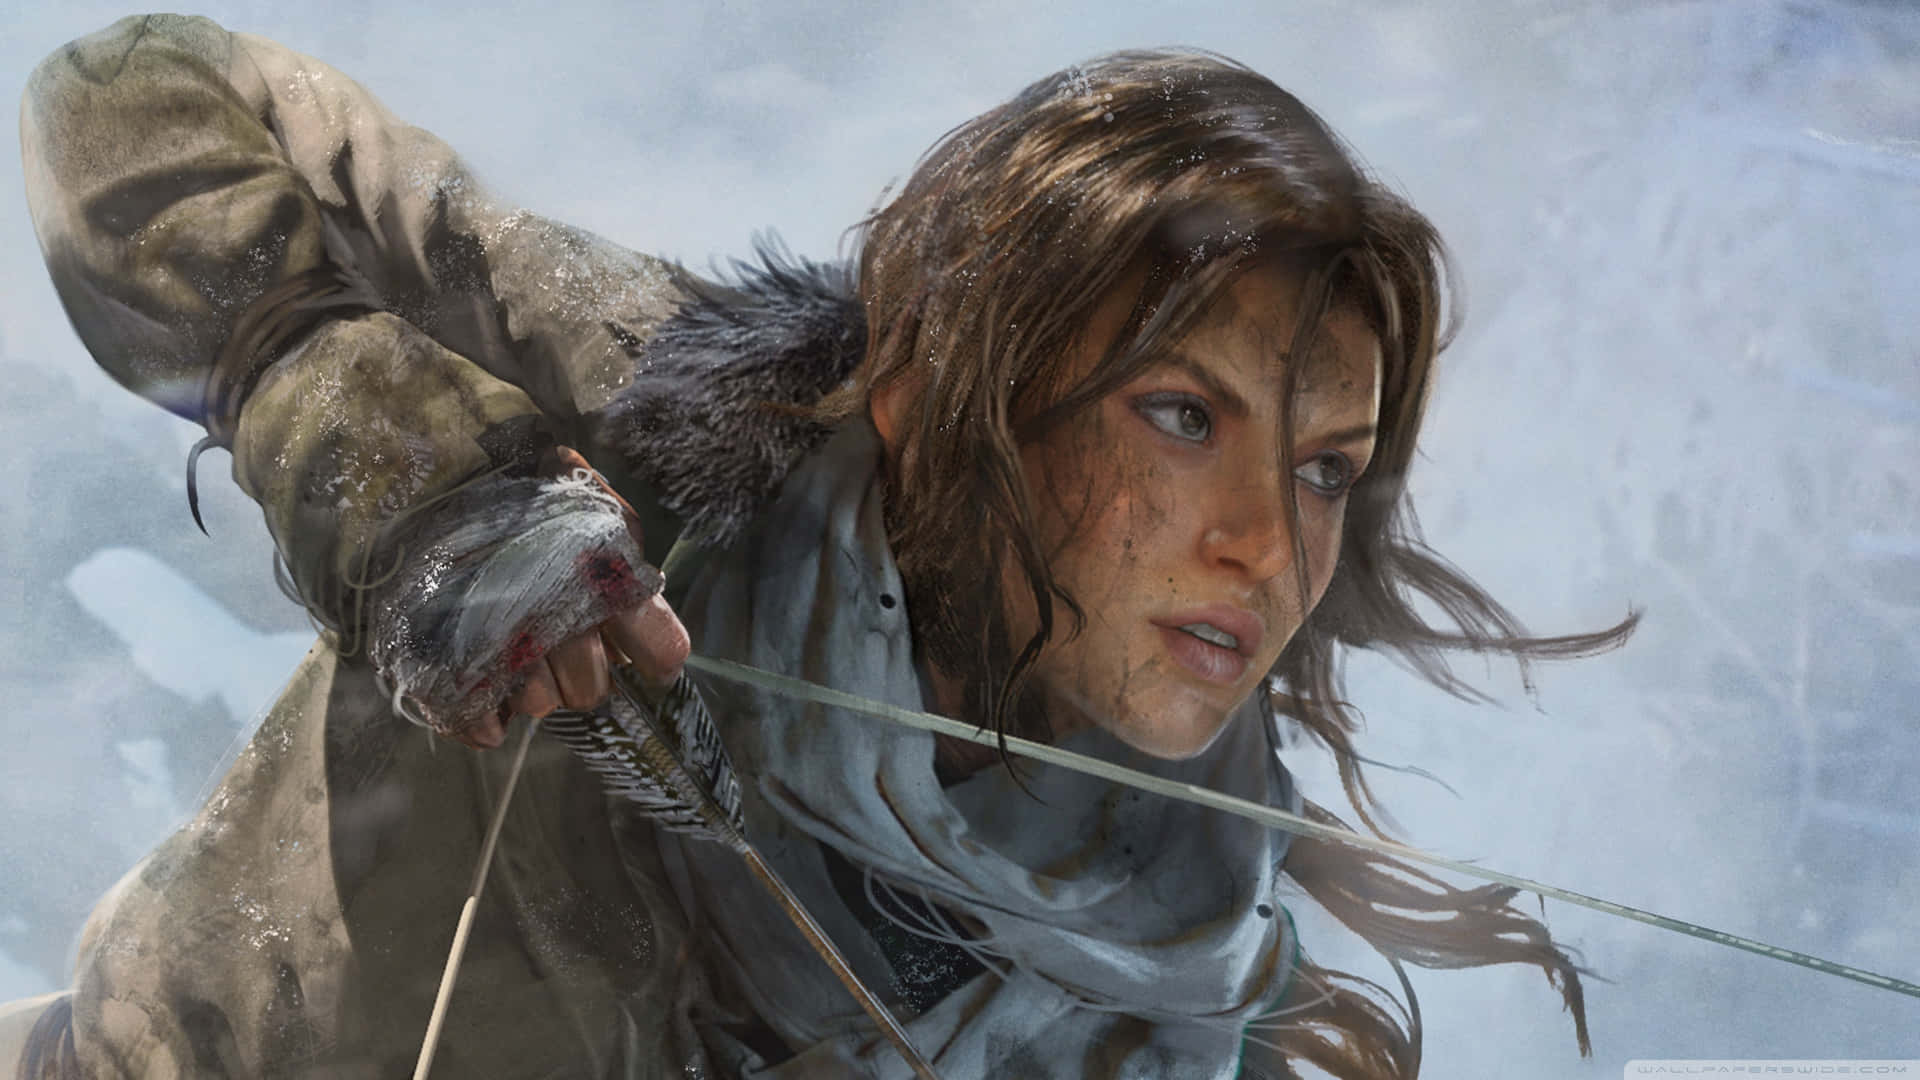 The Tomb Raider Is Holding A Bow And Arrow